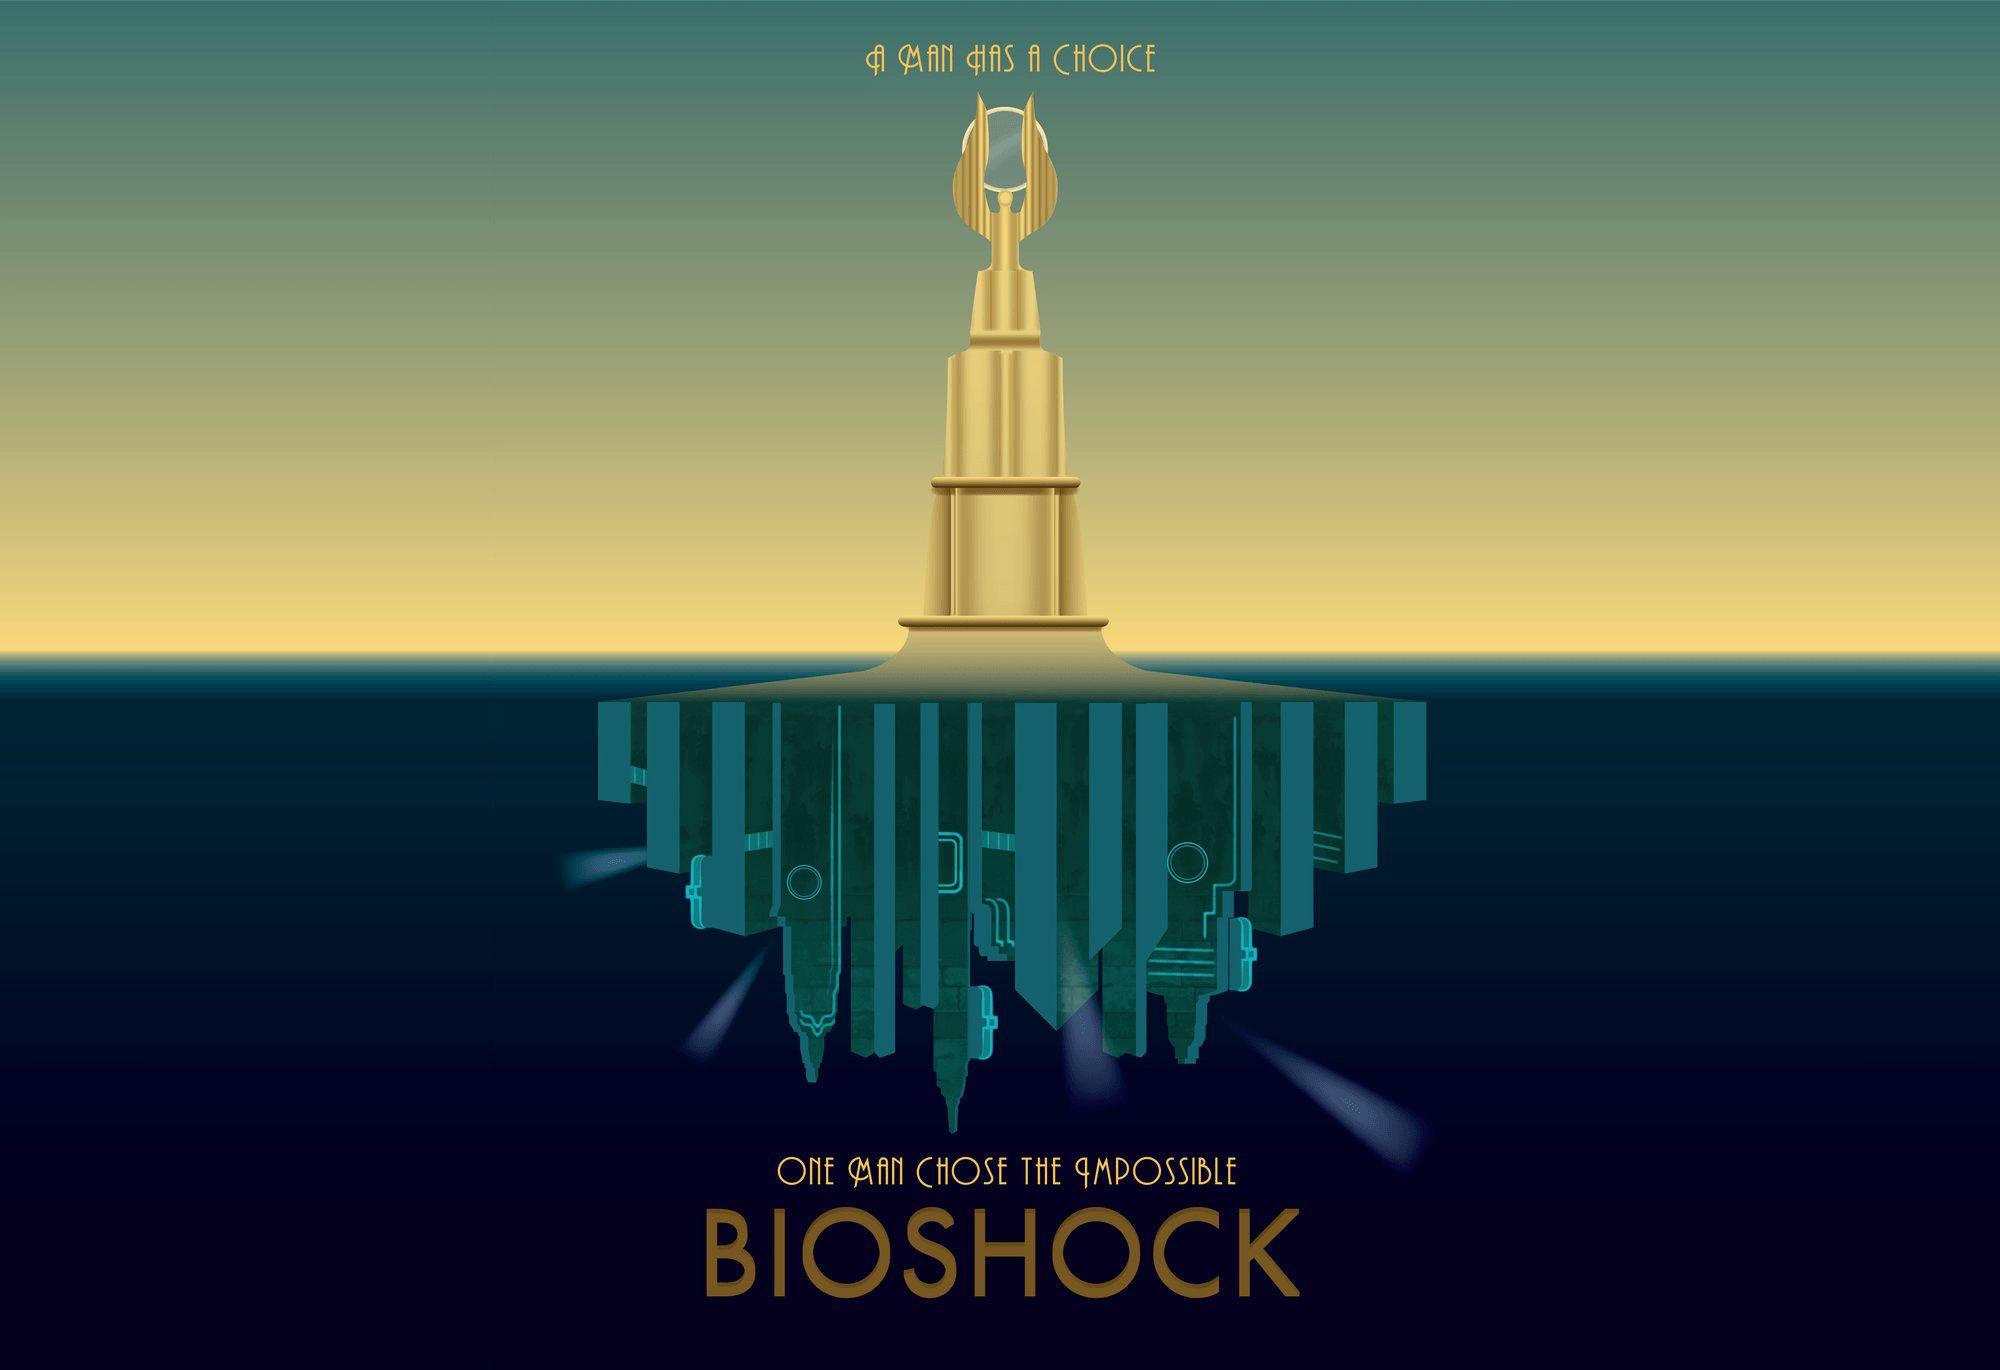 BioShock: The Collection Wallpapers - Wallpaper Cave